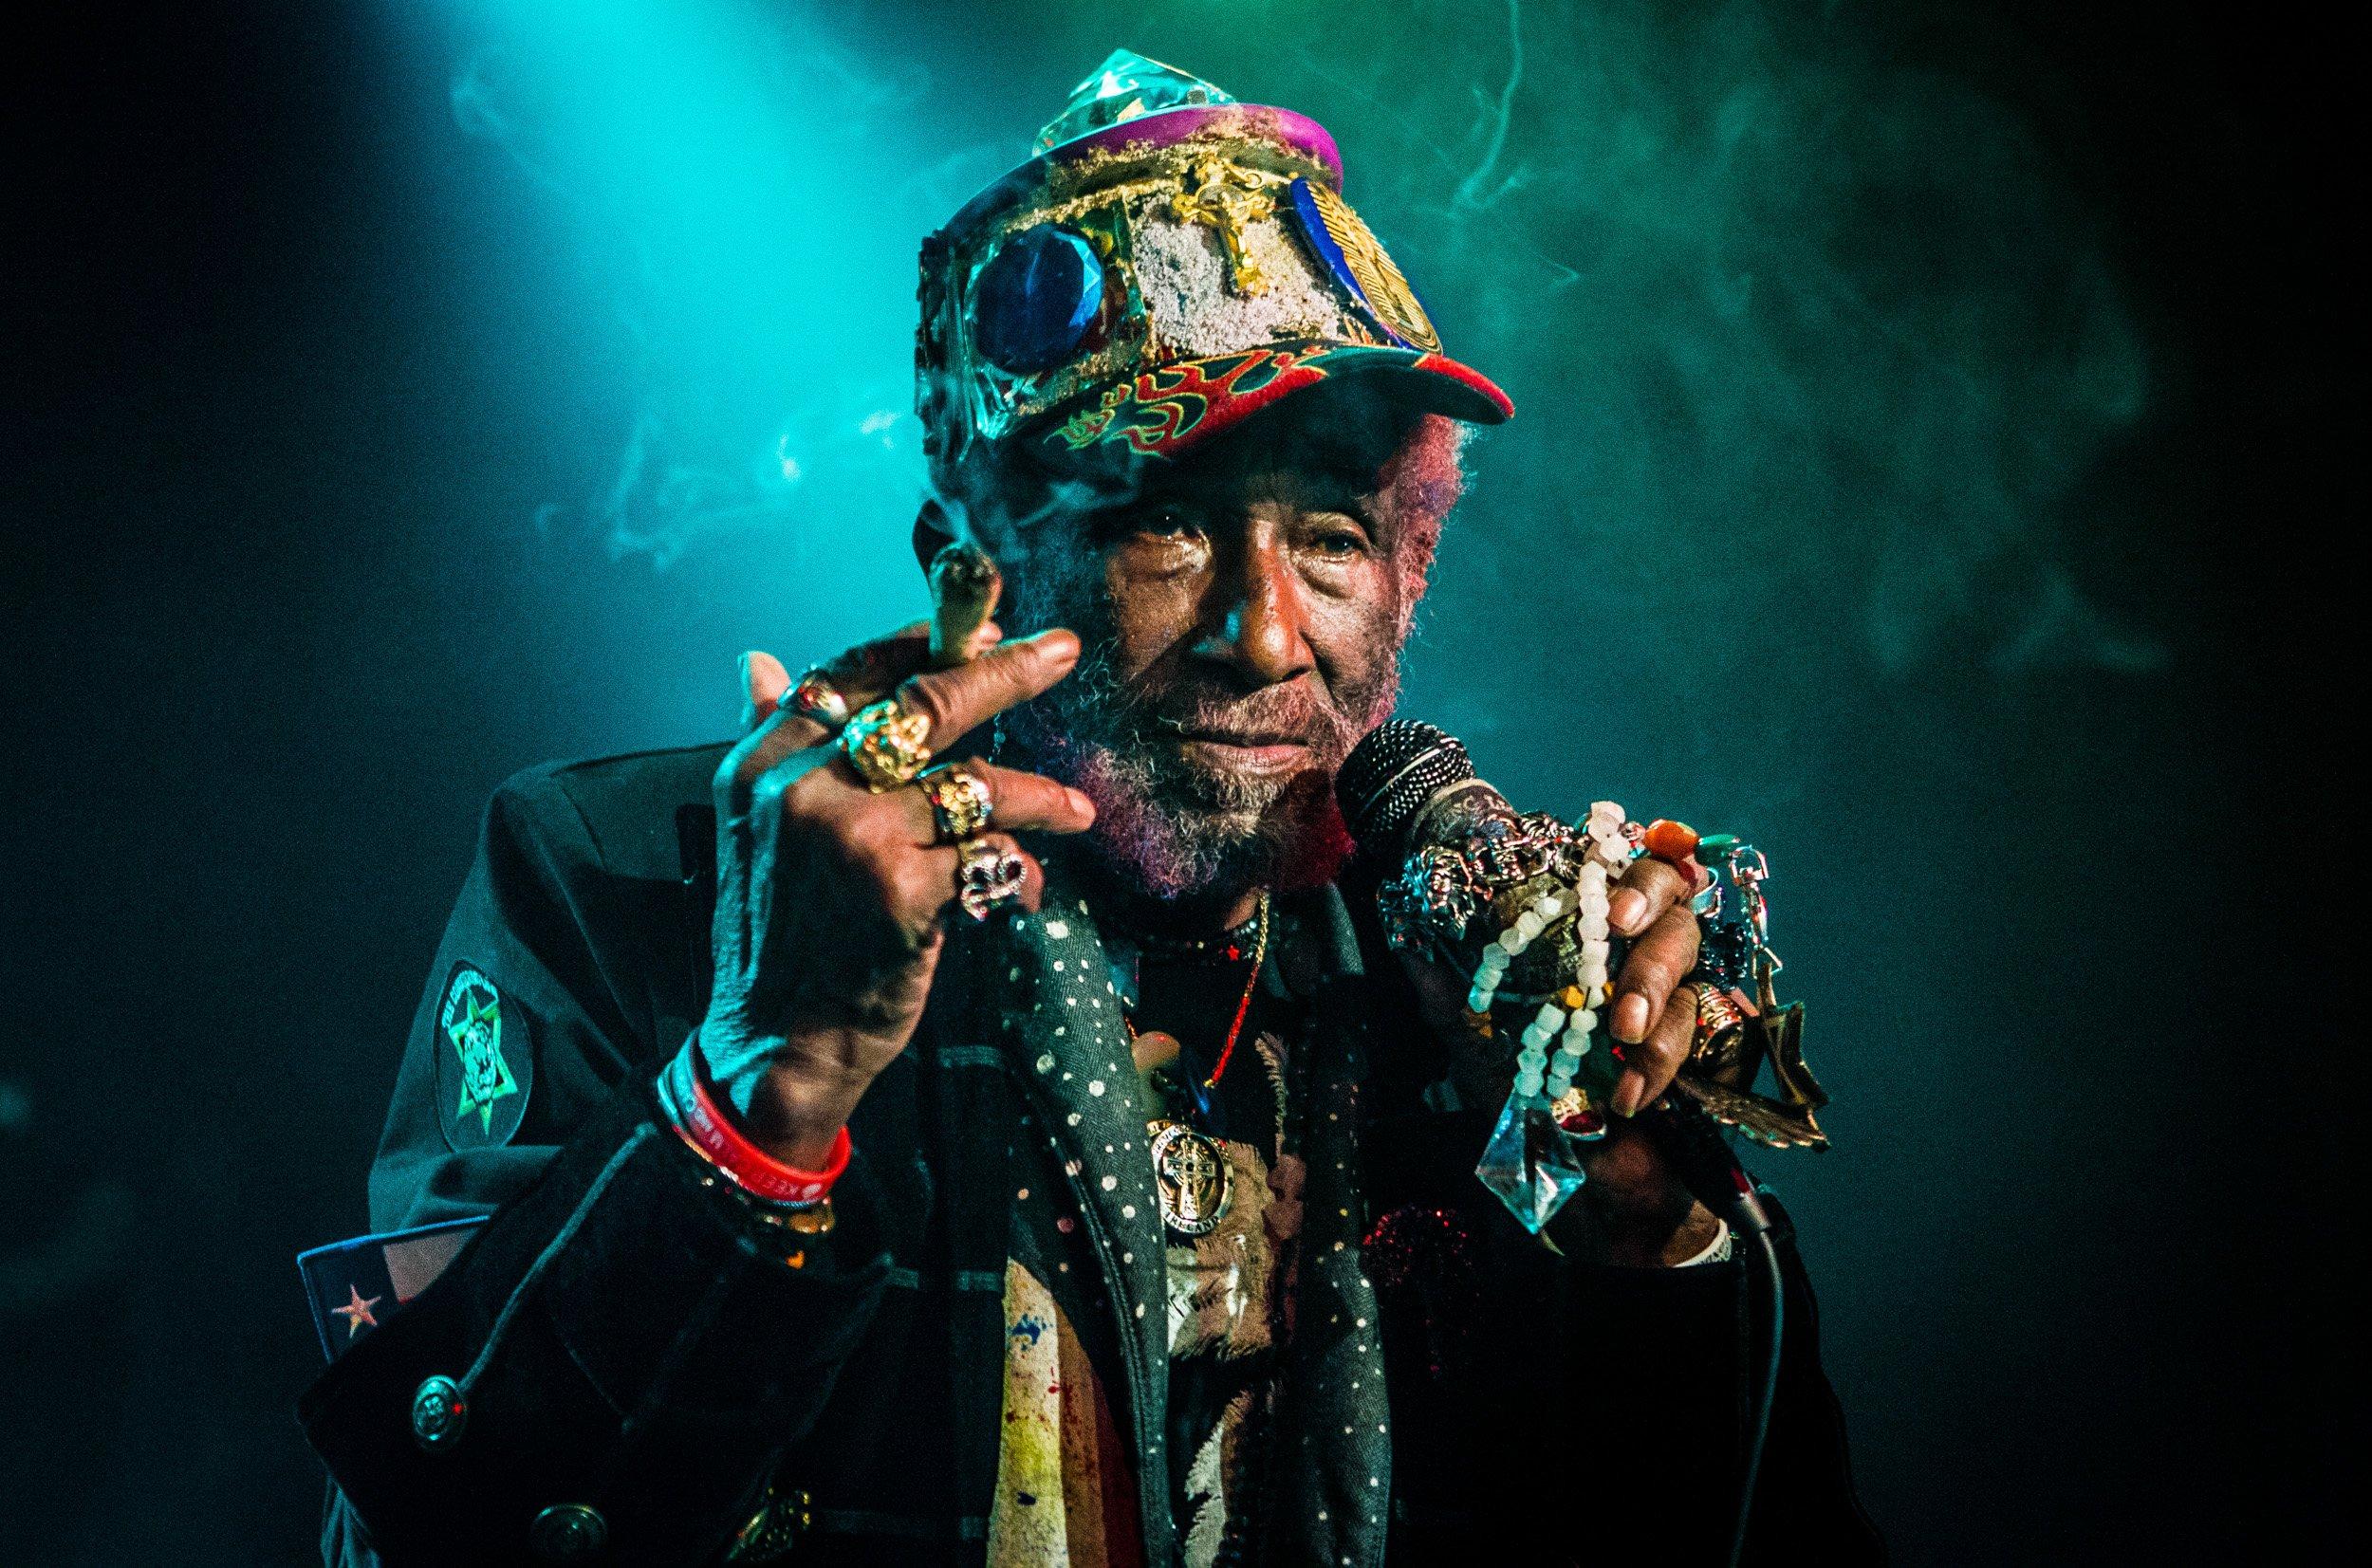 Lee "Scratch" Perry wears a colorful hat and many rings while on the mic